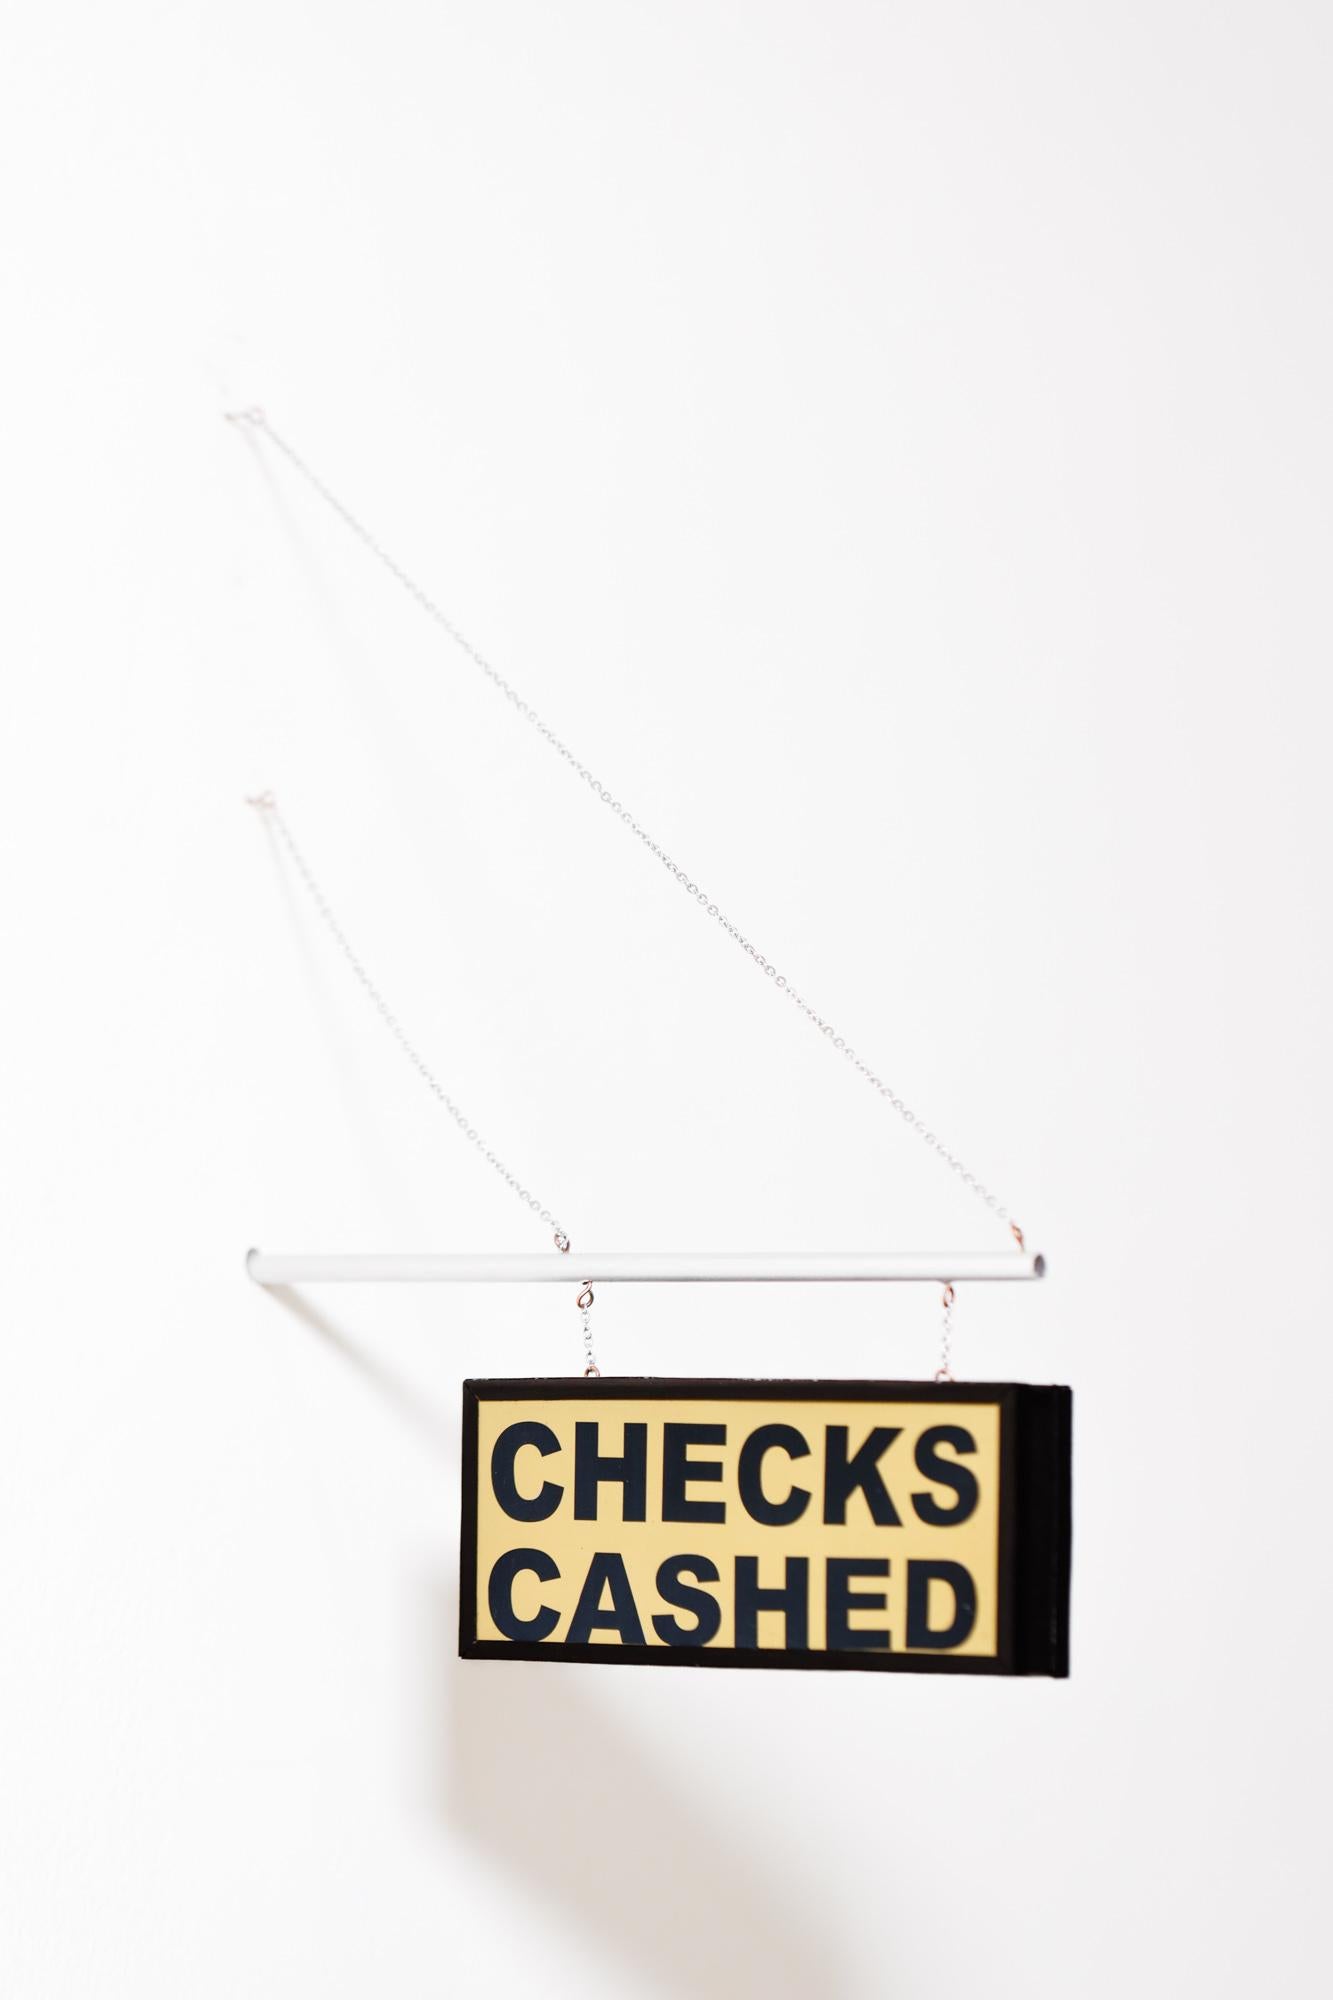 Cash Checked - Sculpture by Drew Leshko